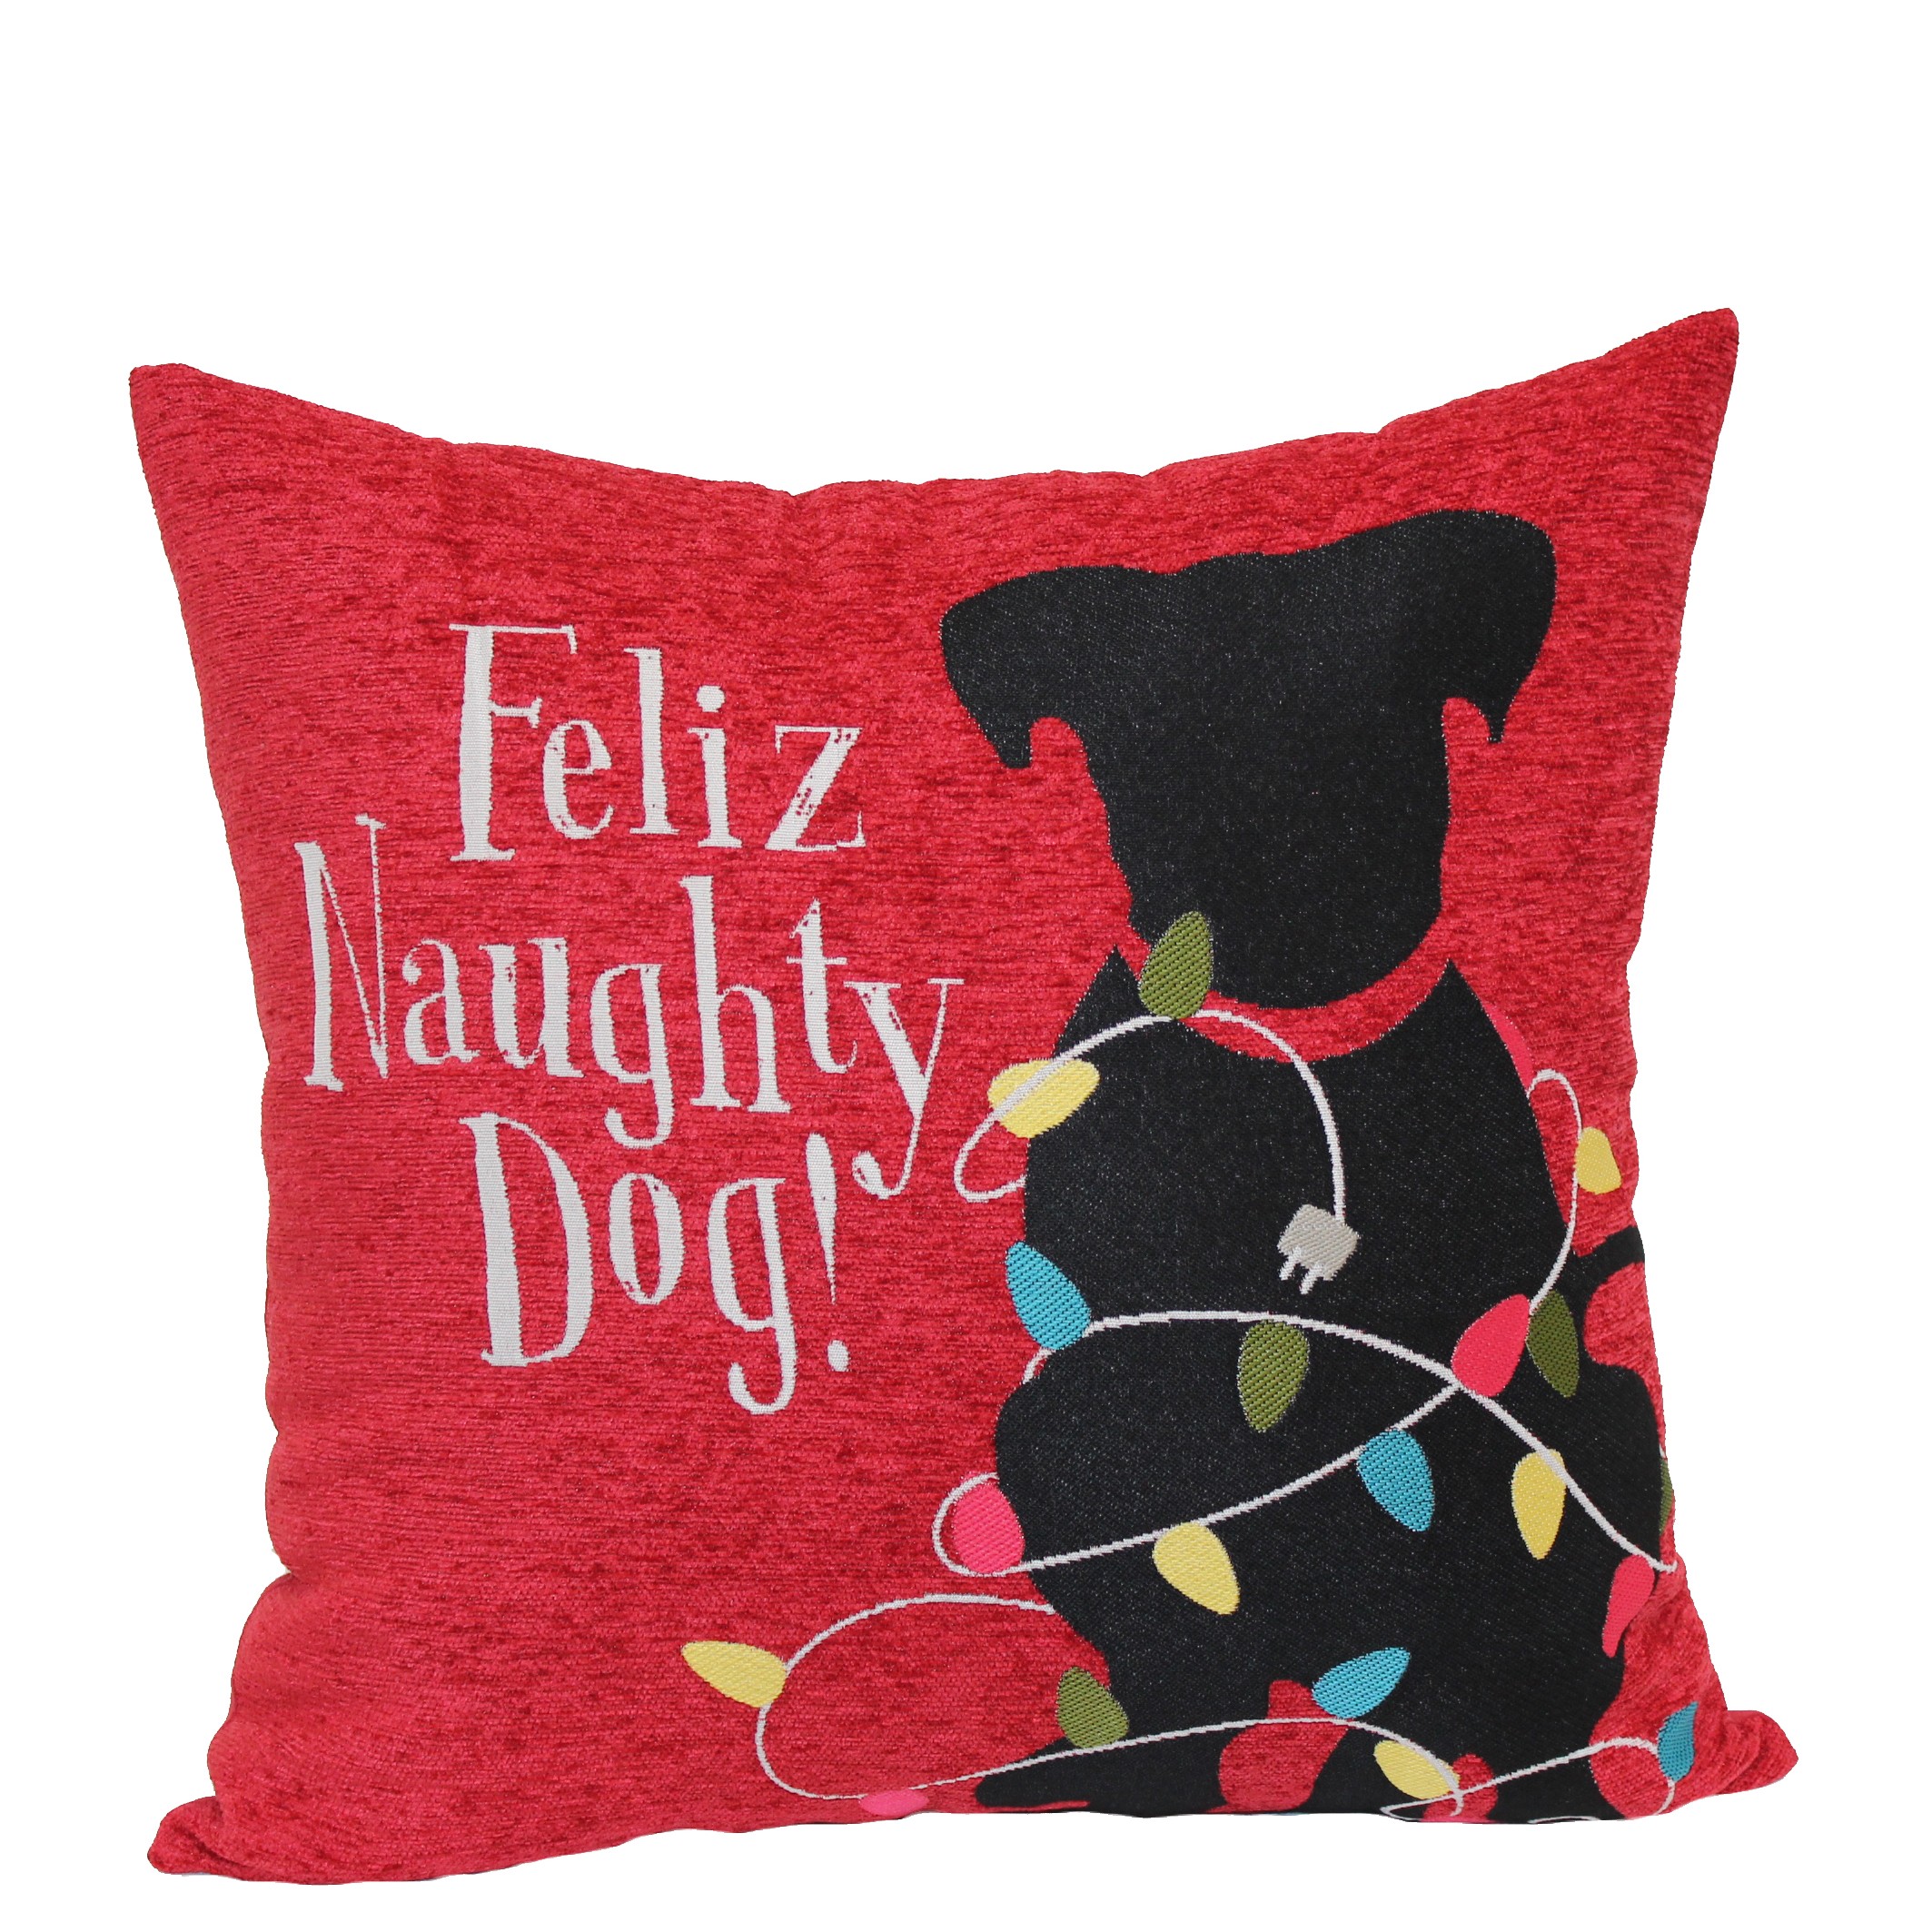 18 x 18" Naughty Dog Tapestry Pillow